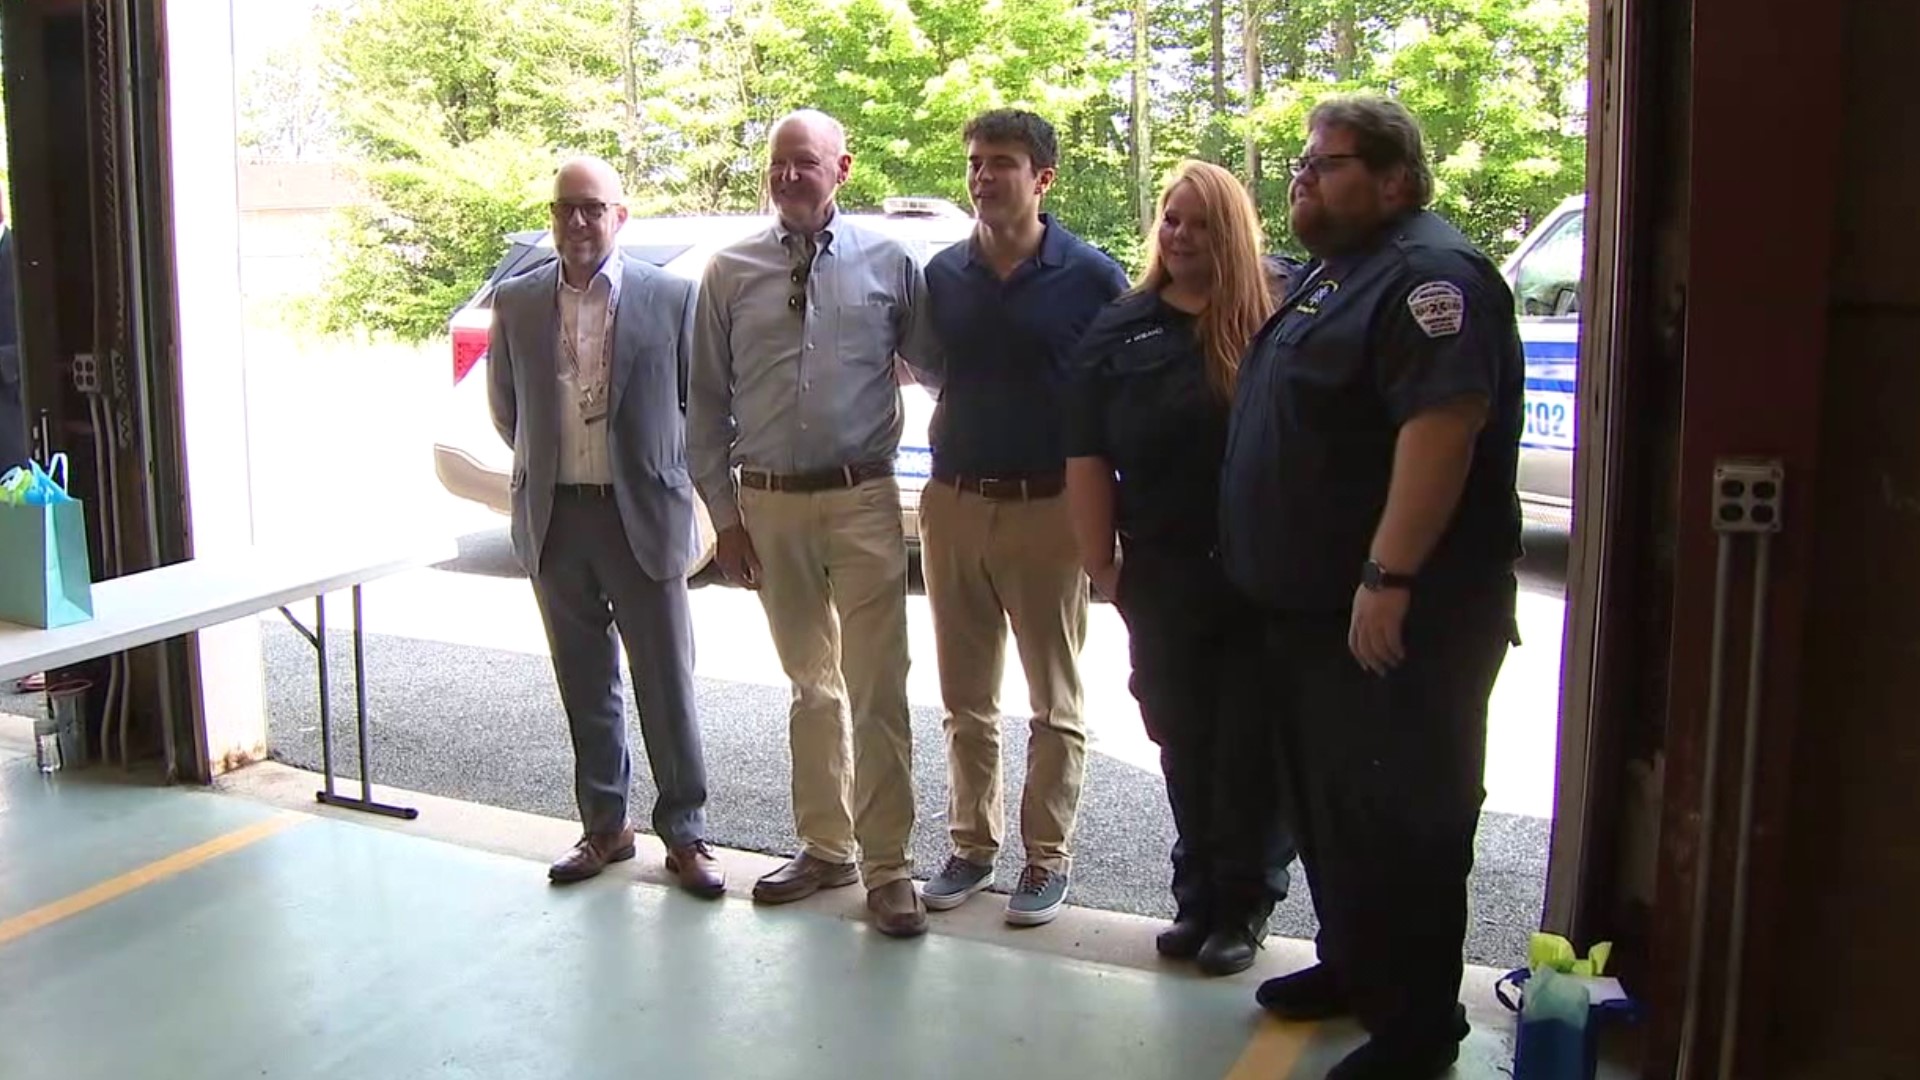 More than a year after a man suffered a heart attack in the Poconos, he reunited with the care team that saved his life.